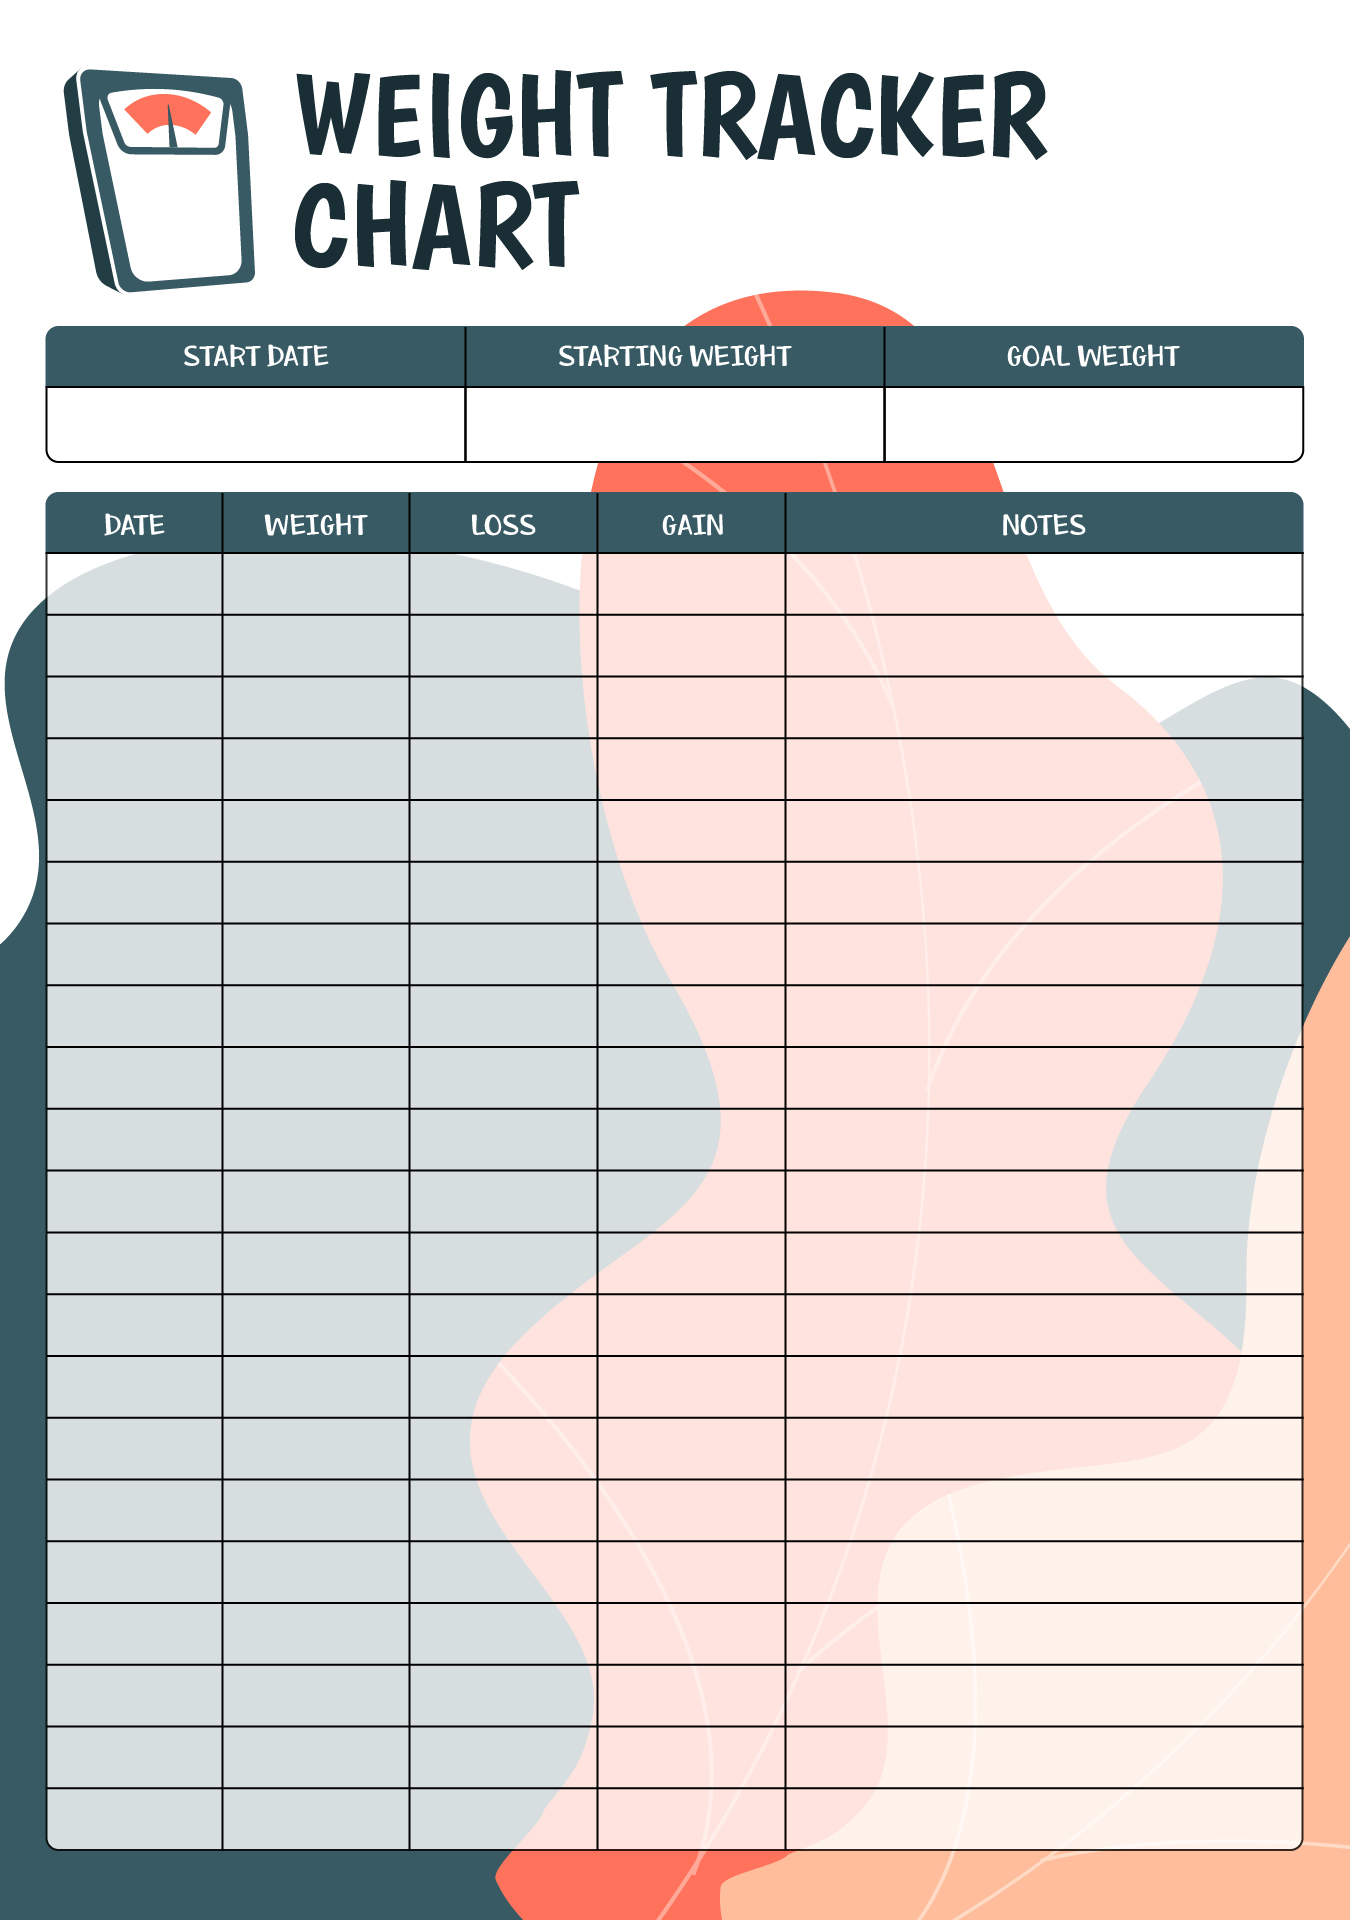 Free Printable Weight Tracker